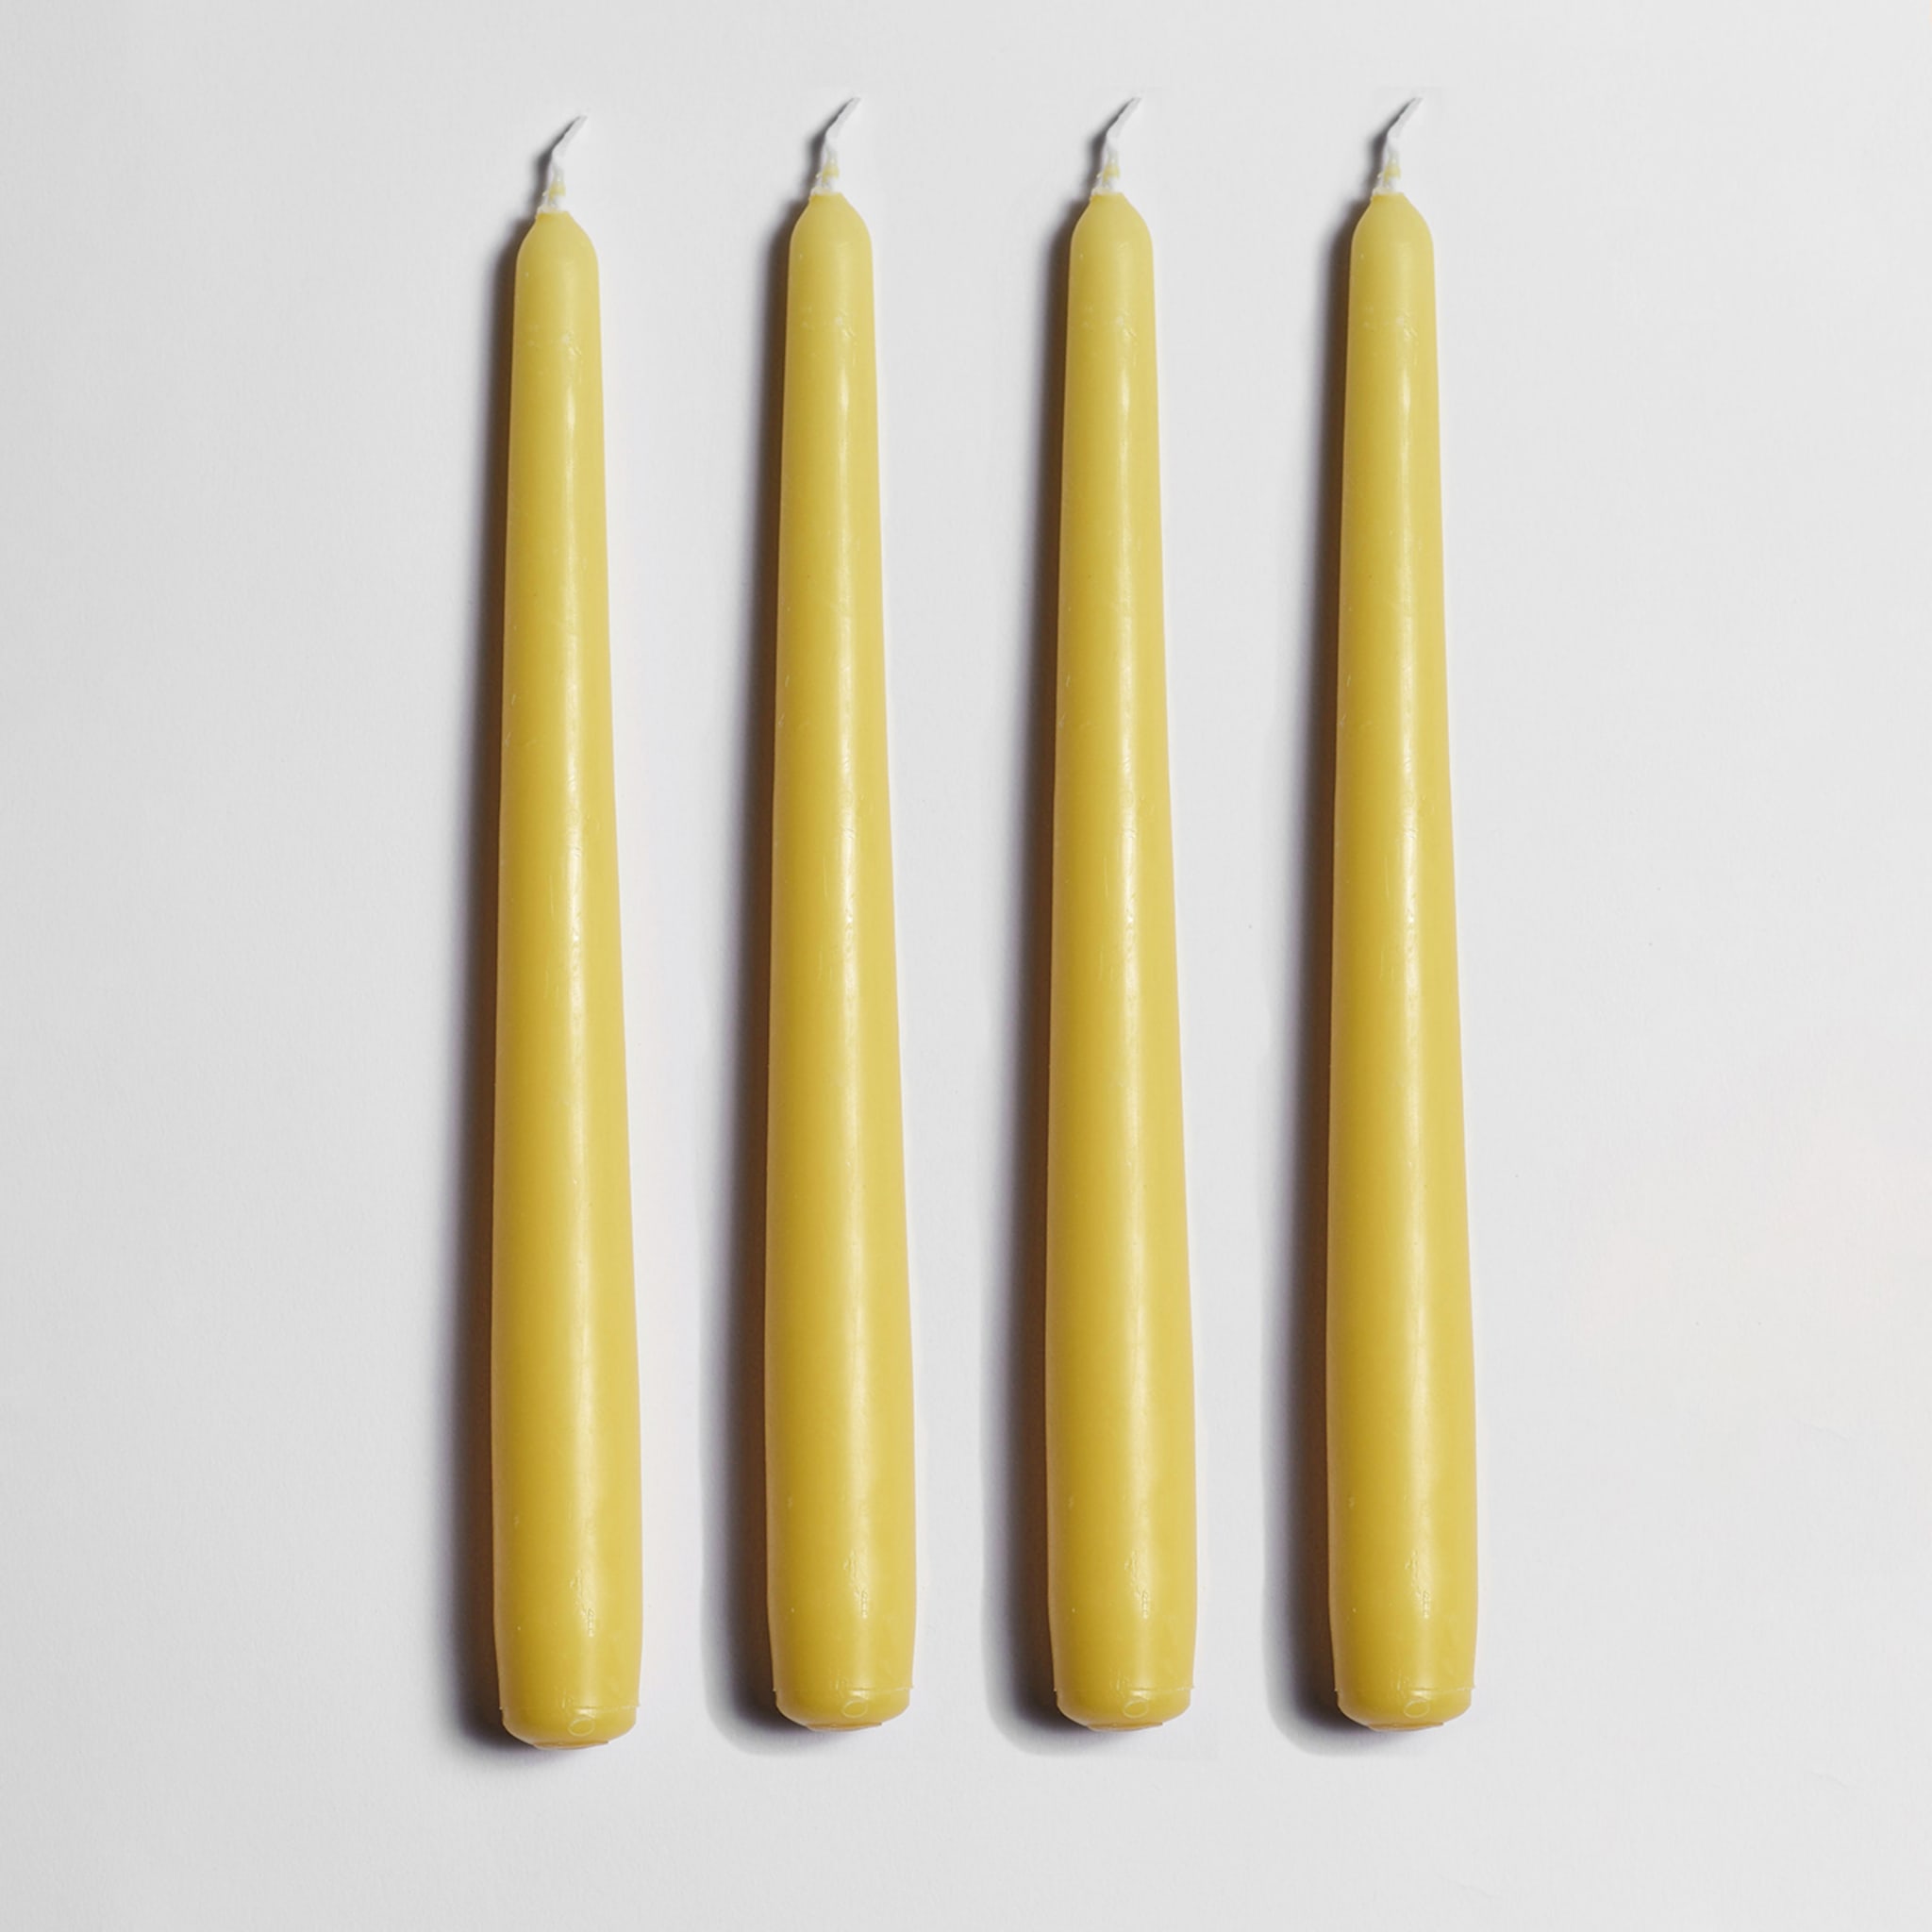 Yellow Ceramic Candlestick with 4 Scented Candles - Alternative view 2